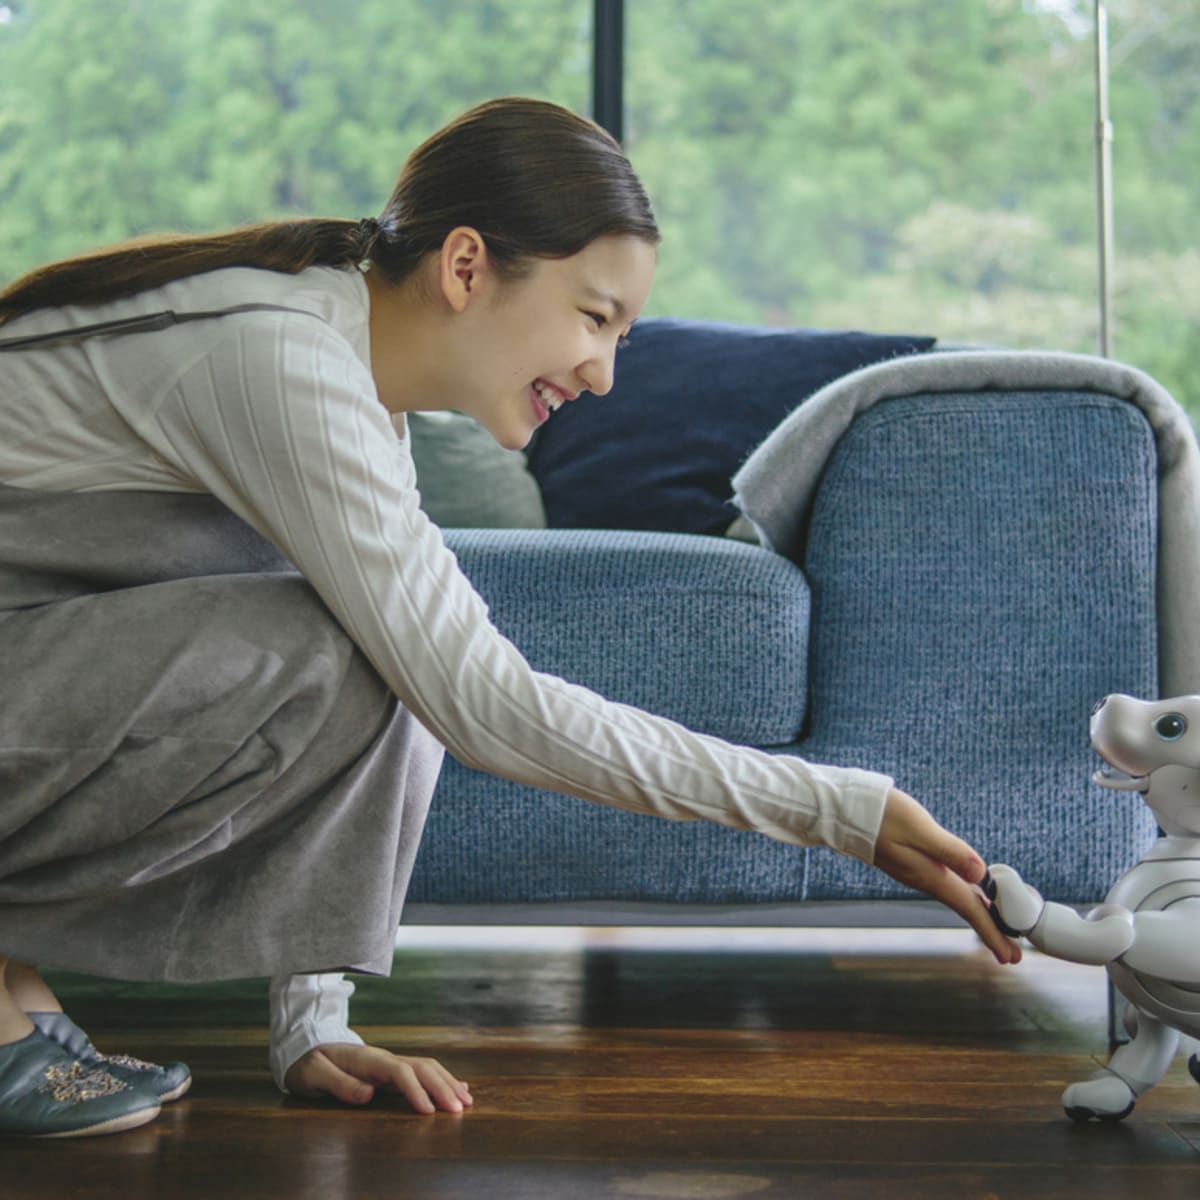 Sony Aibo Review: What It's Like To Live With a $2,900 Robot Dog